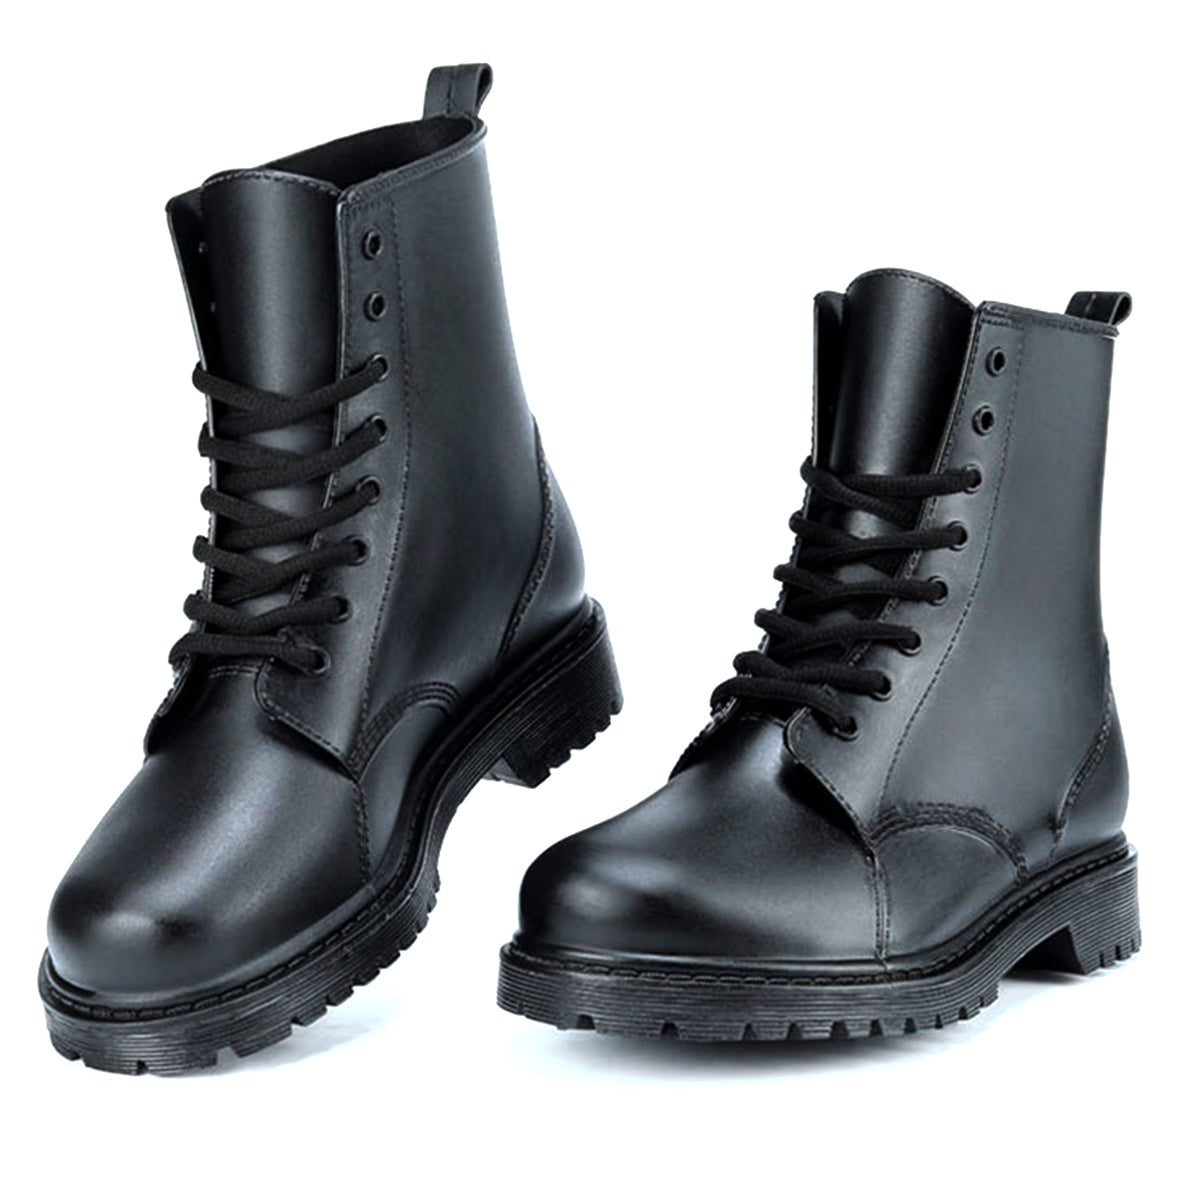 Nomad Black Leather Waterproof Boots